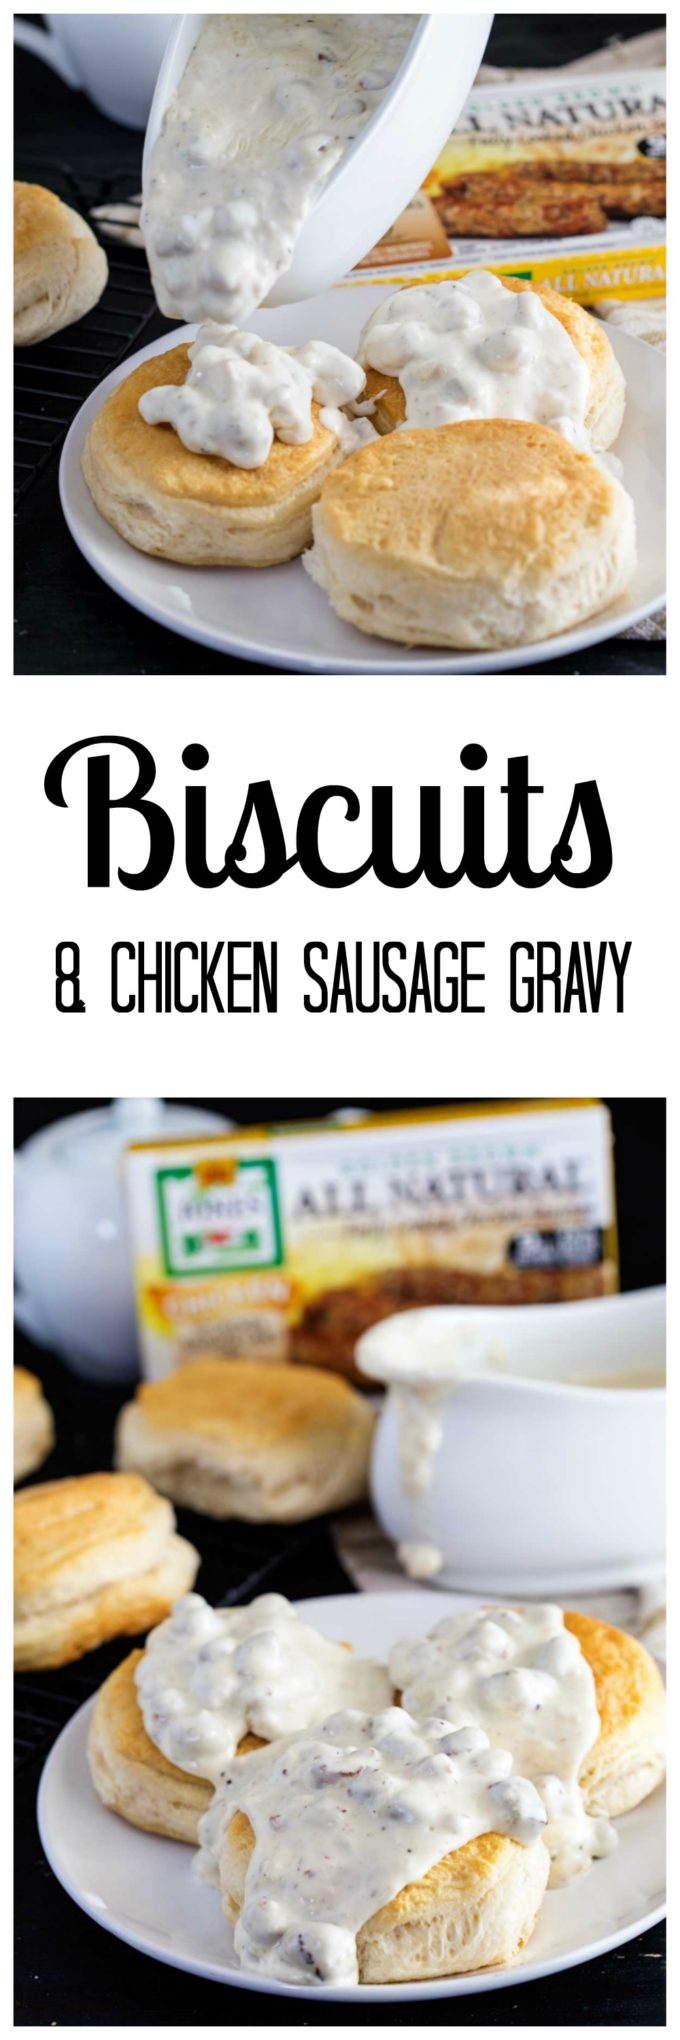 biscuits and gravy, chicken sausage gravy over biscuits, a hearty breakfast 